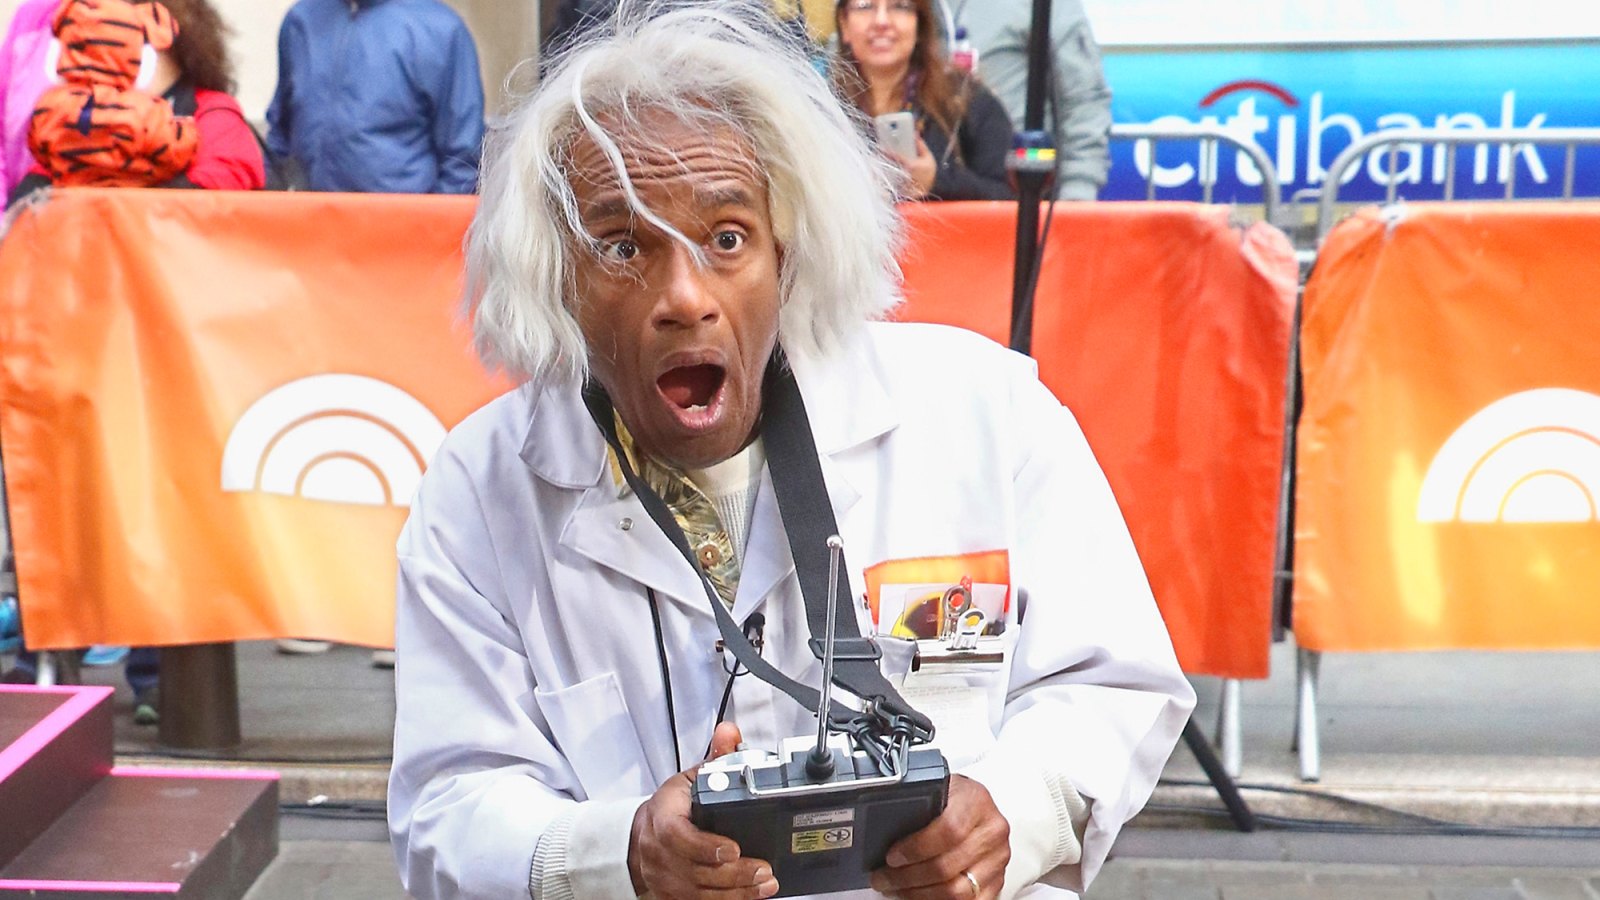 Al Roker attends the NBC "Today" Halloween 2018